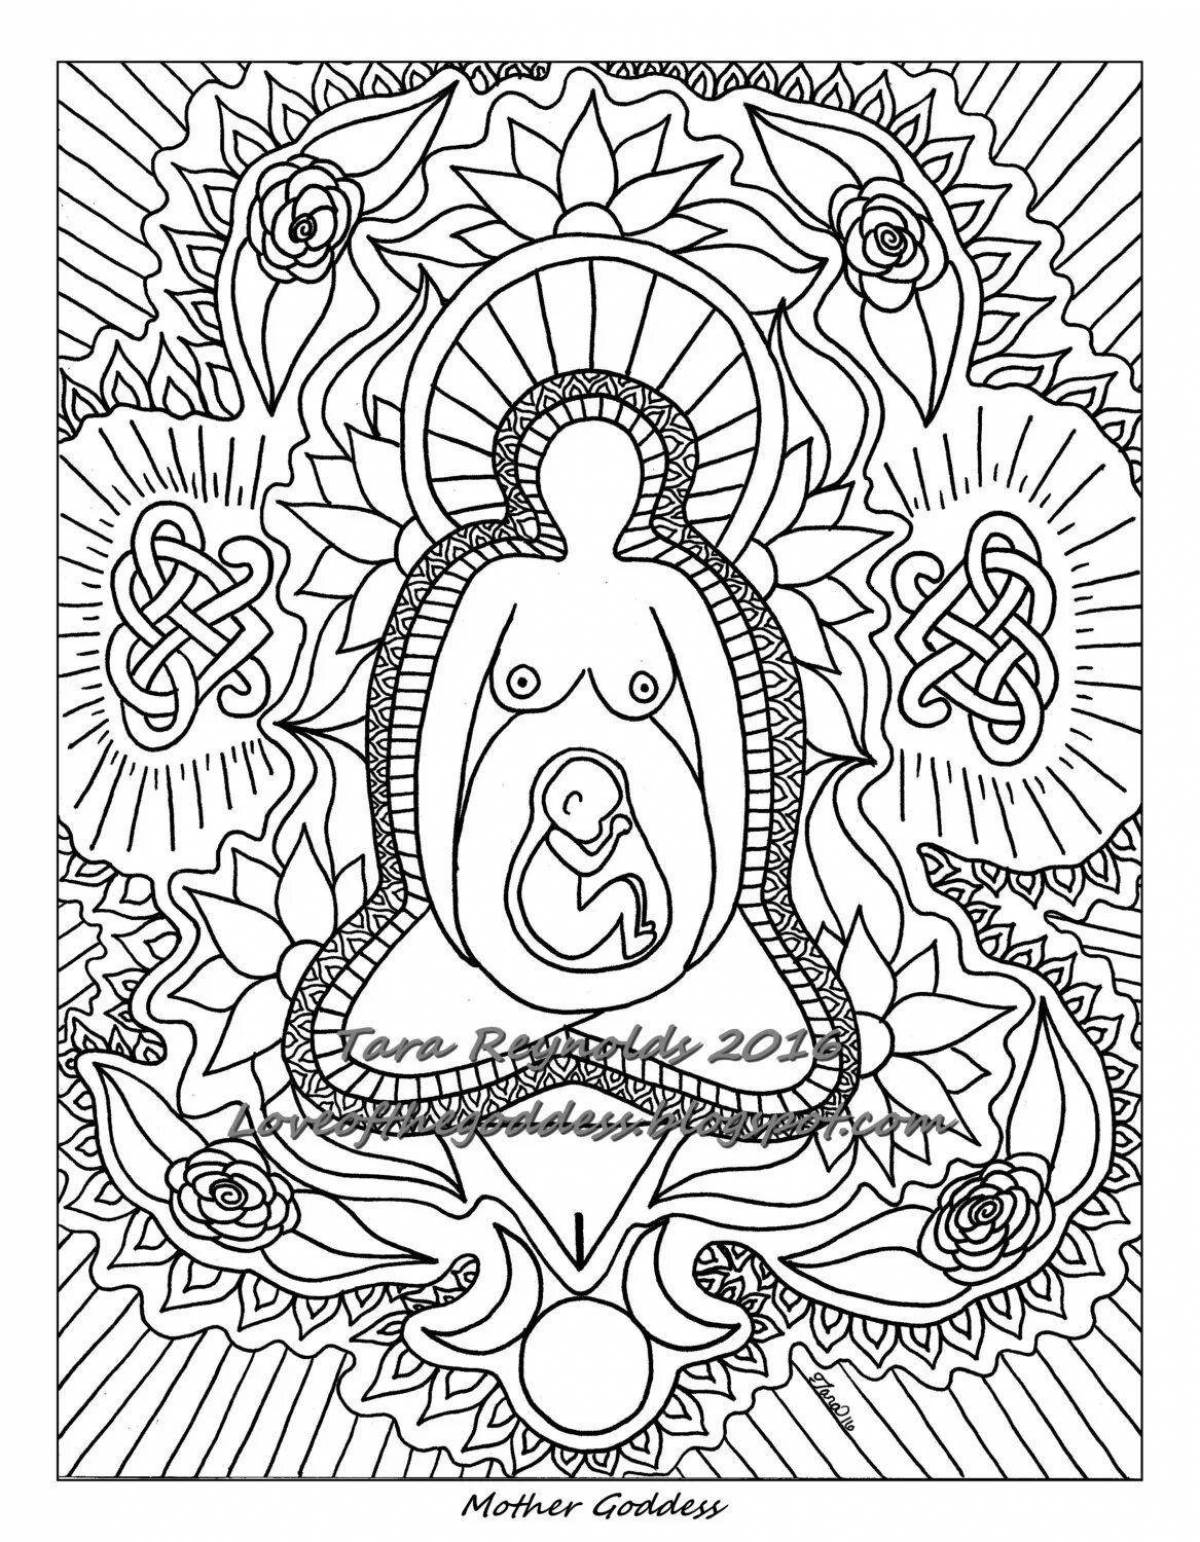 Creative mantra coloring pages for kids